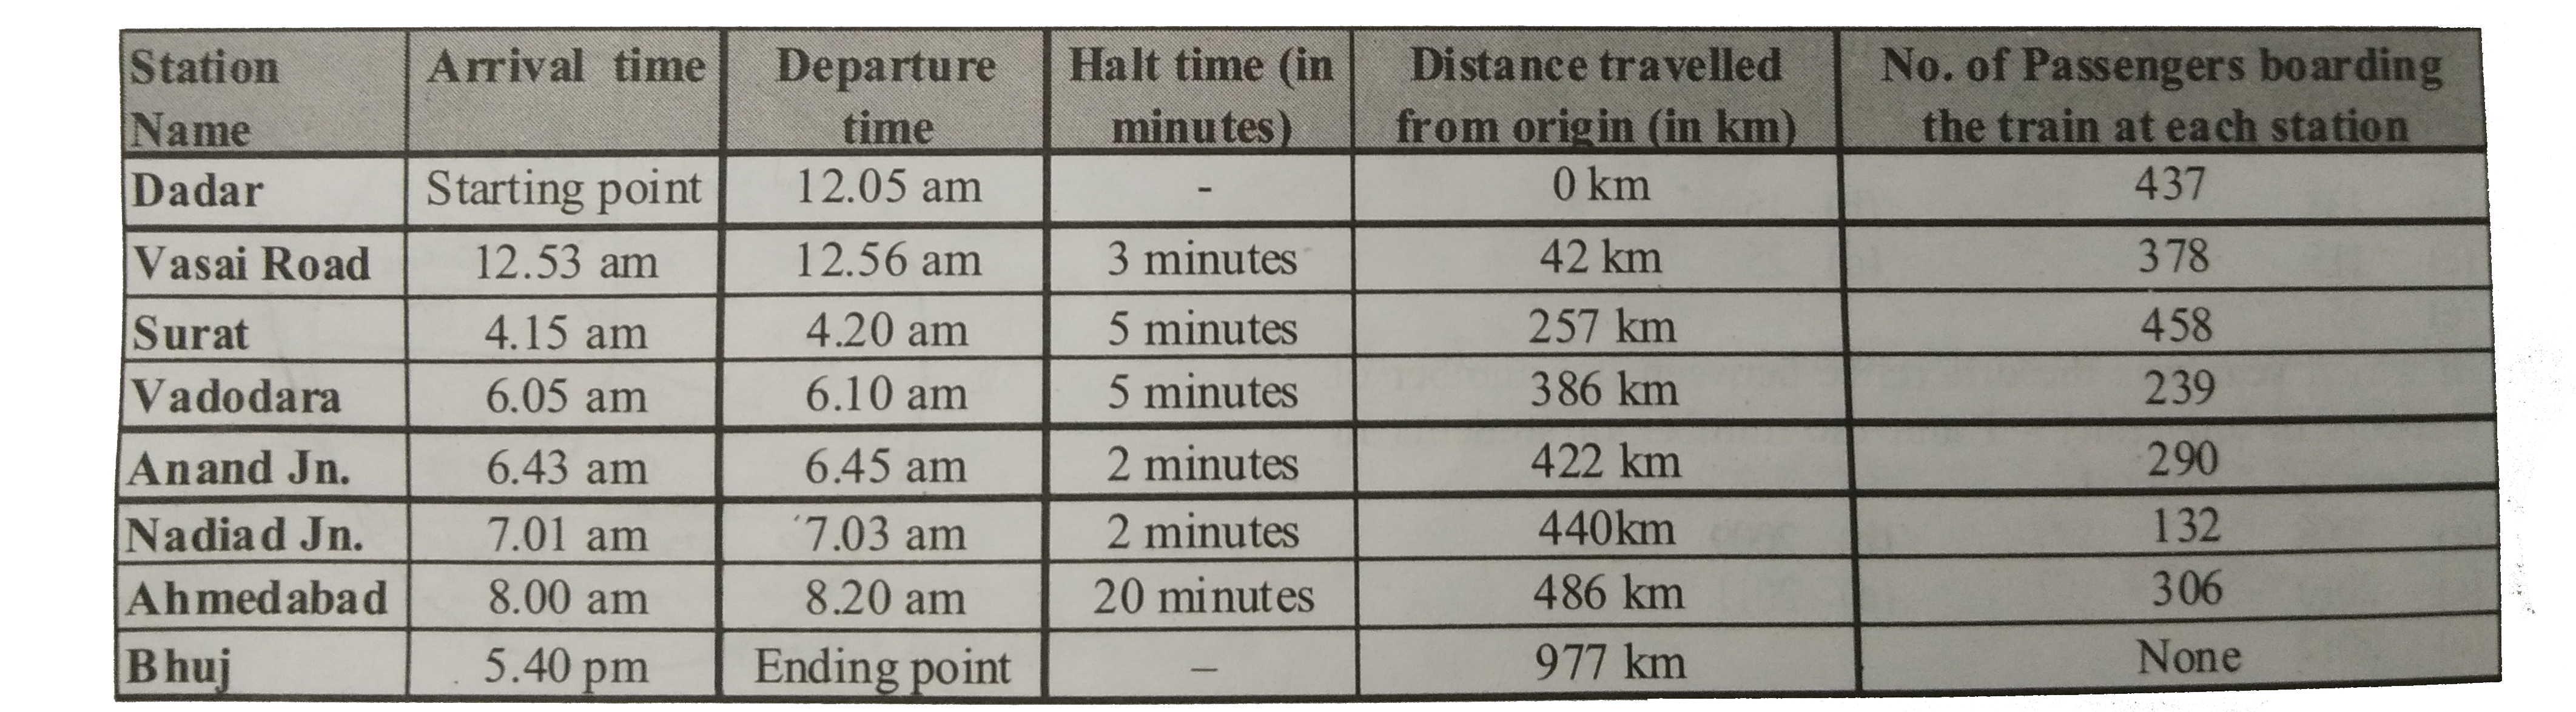 What is the distance traveled by the train from Surat to Nadiad Jn. ?